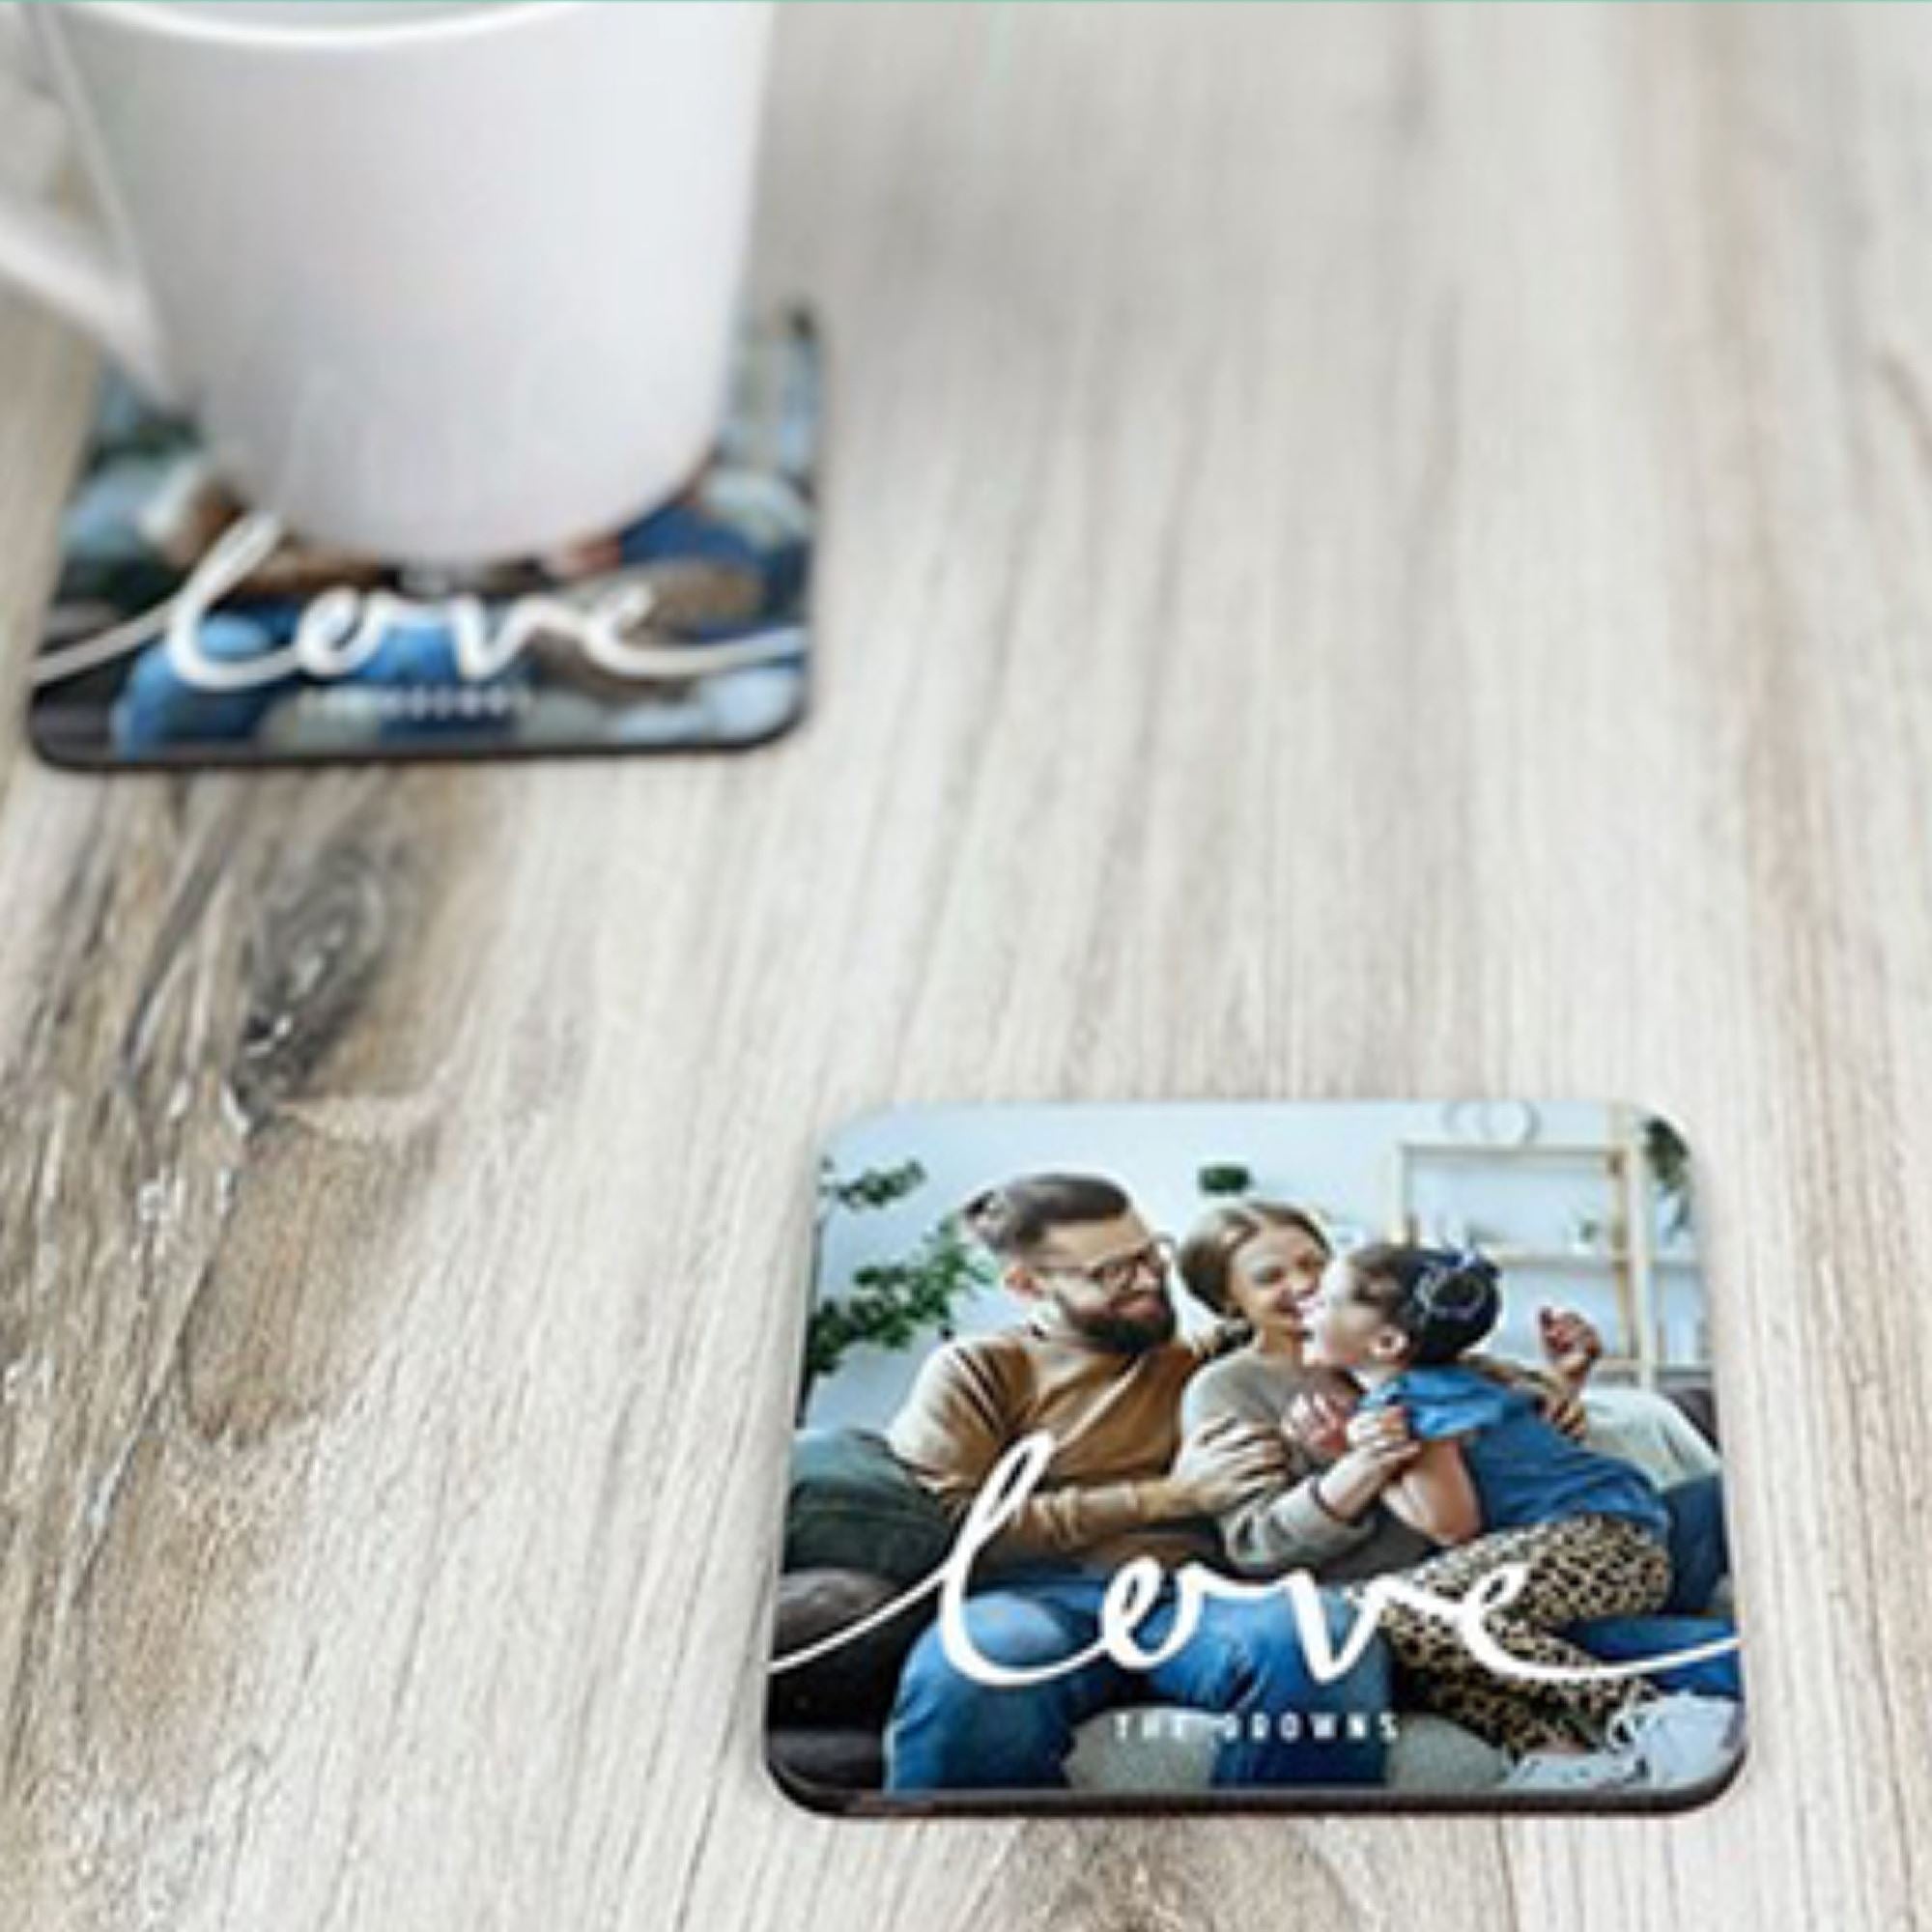 Sublimation coaster with cork back 3.75 x 3.75 inches